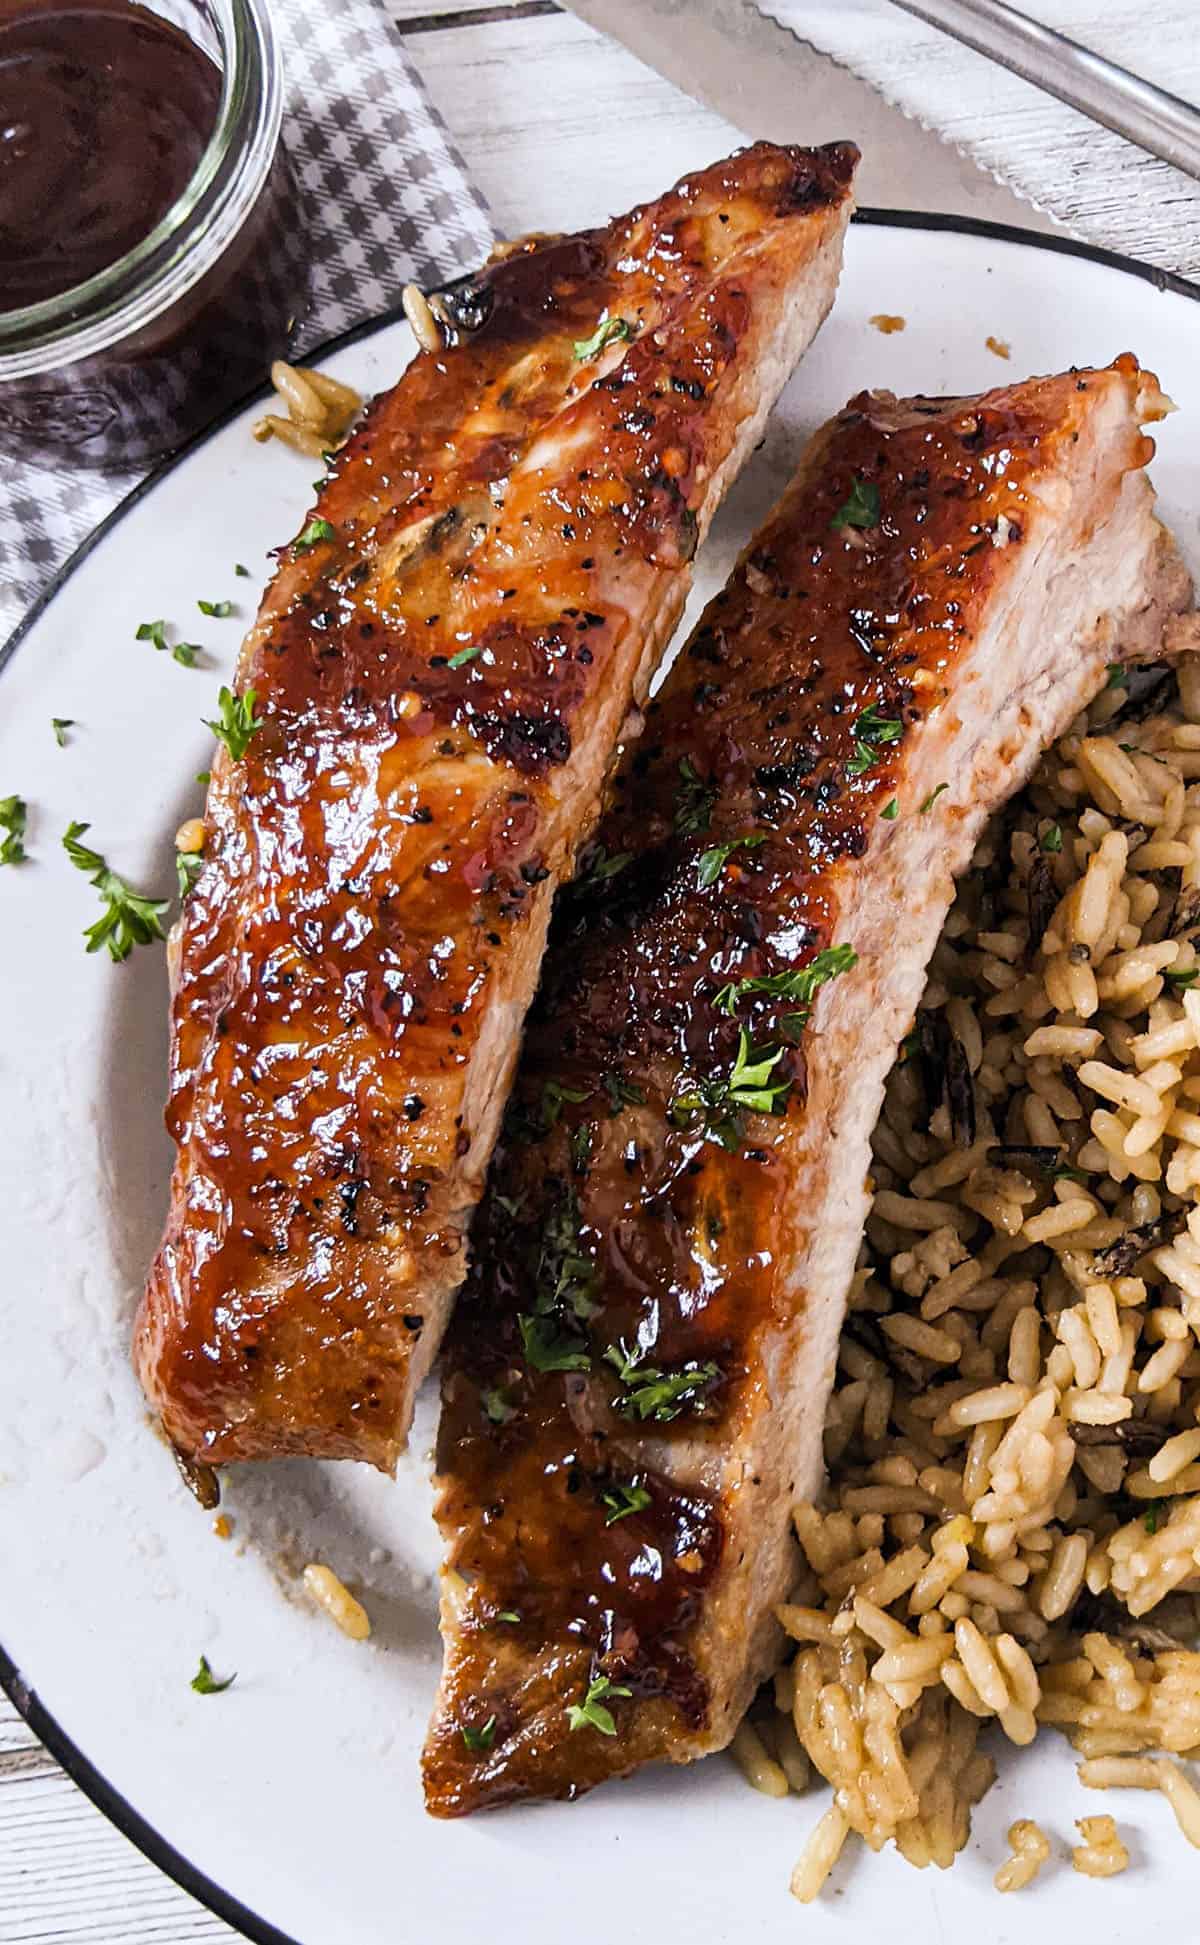 2 oven roasted ribs on a white plate with rice on the side.